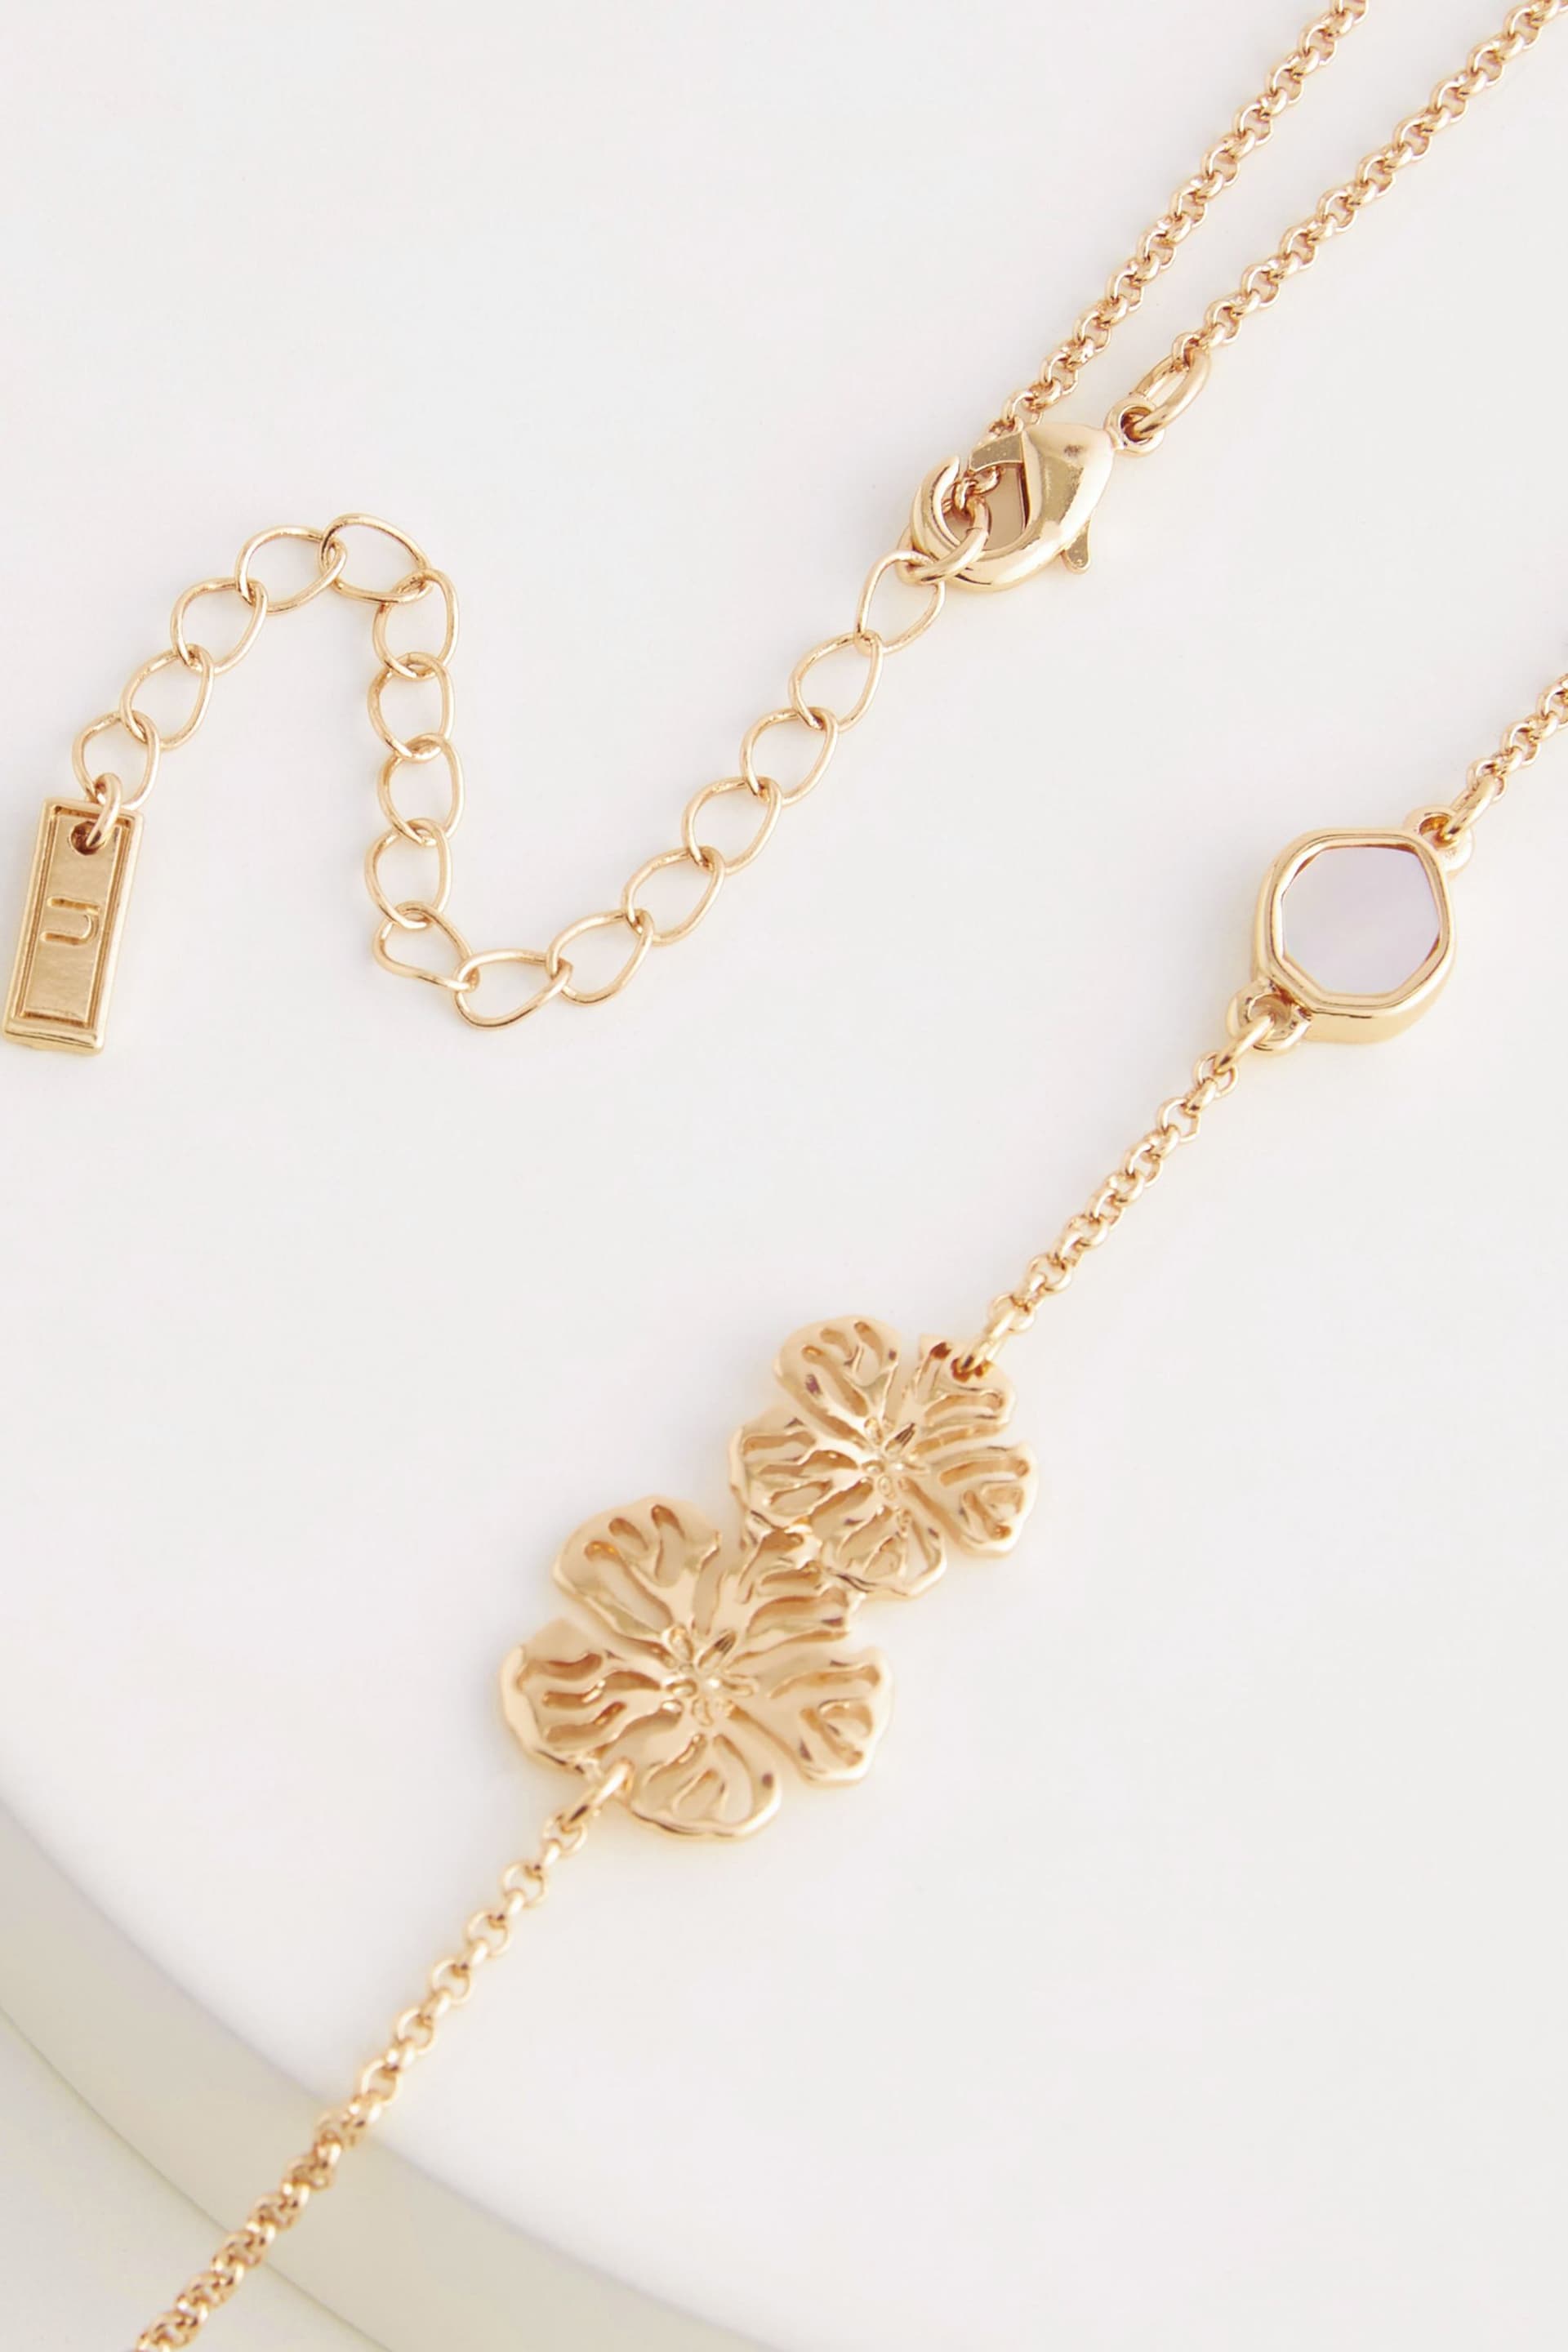 Gold Tone Floral Long Rope Necklace - Image 3 of 3